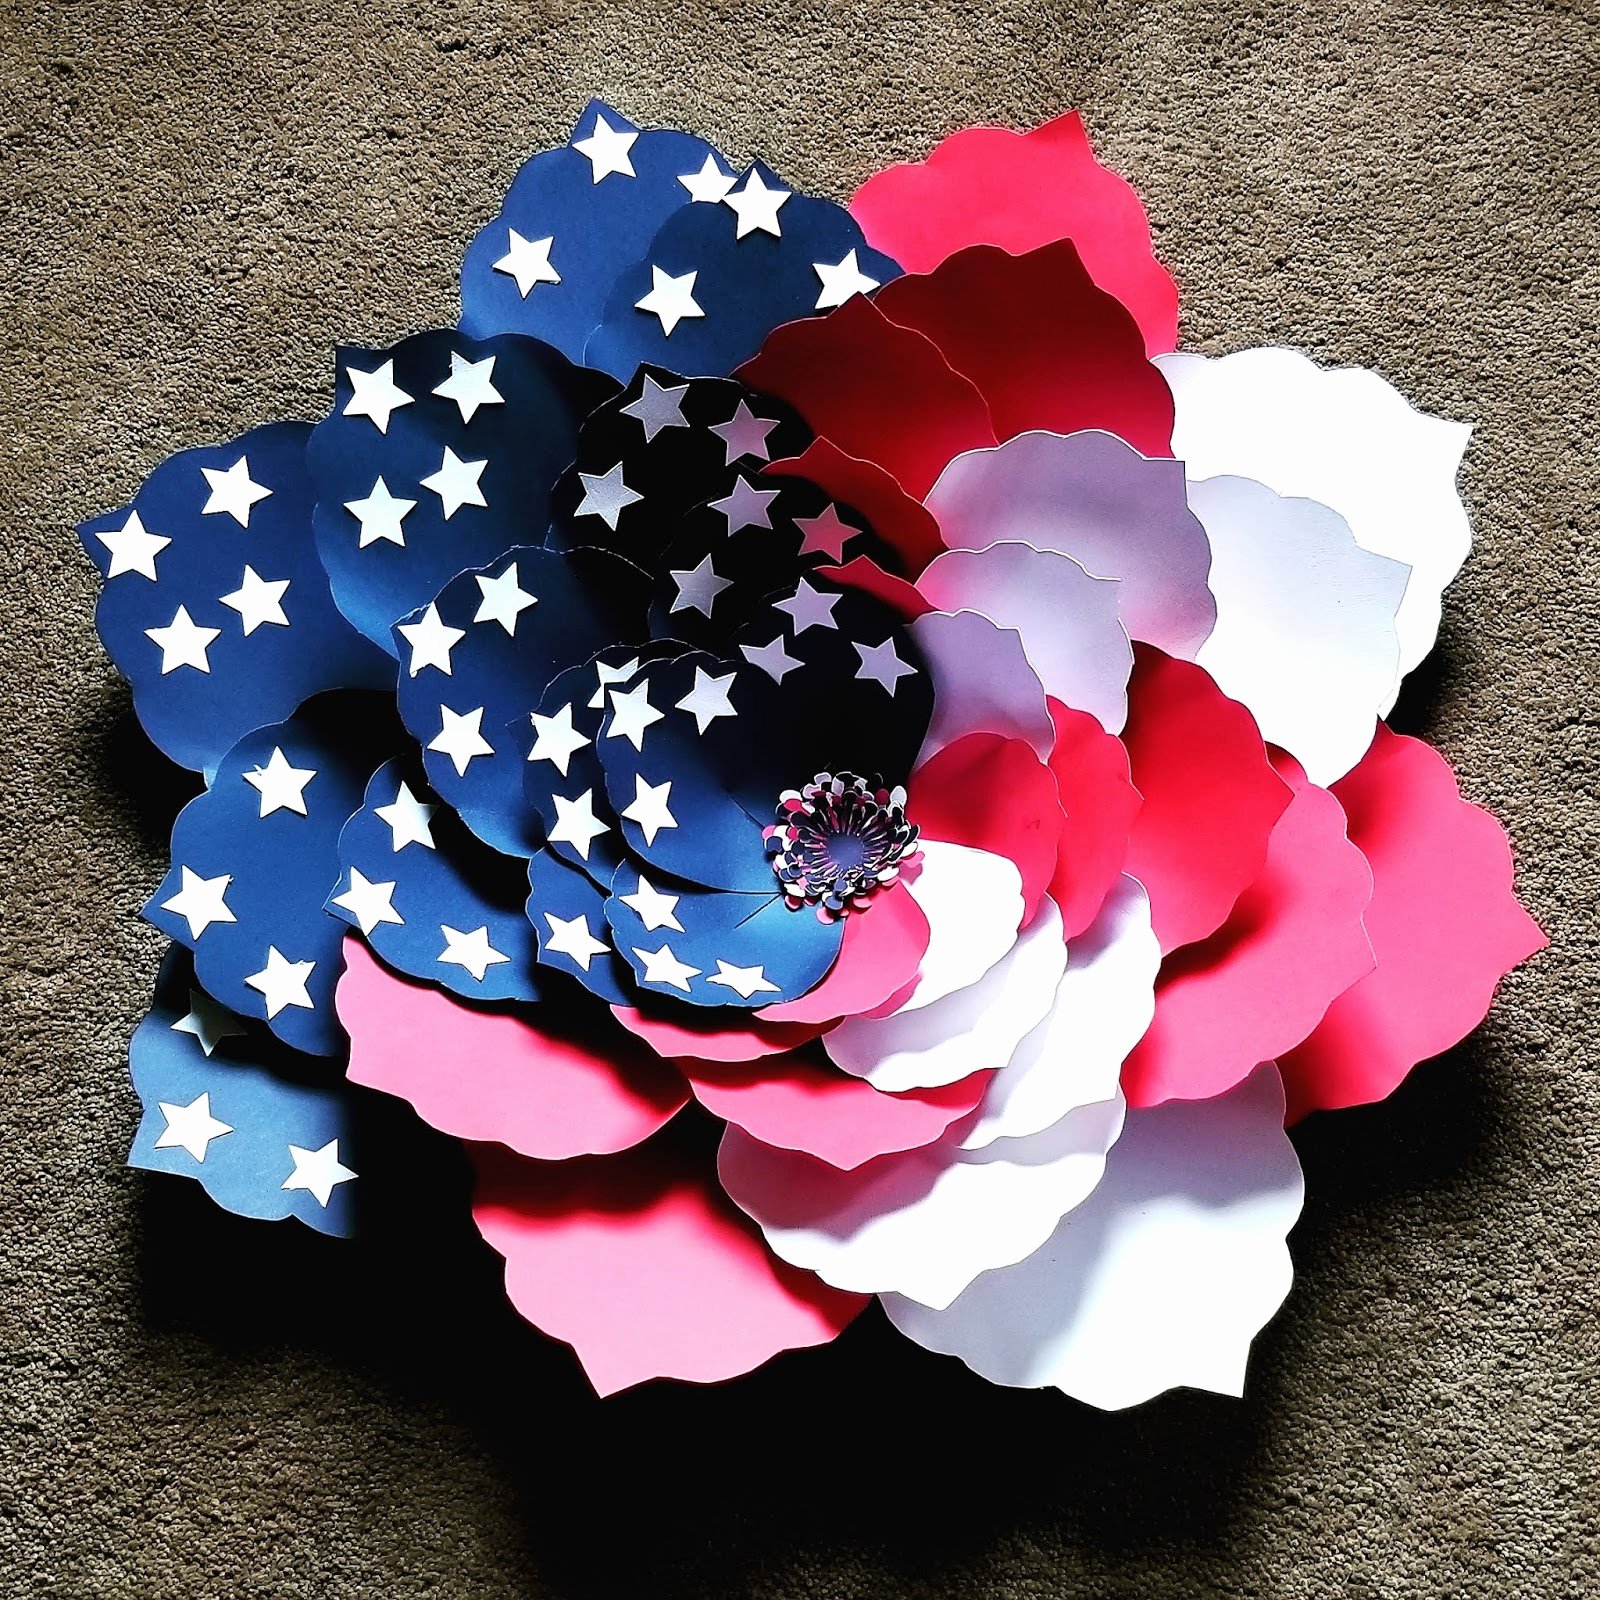 Templates for Paper Flowers Best Of Patriotic American Flag Paper Flower Step by Step with